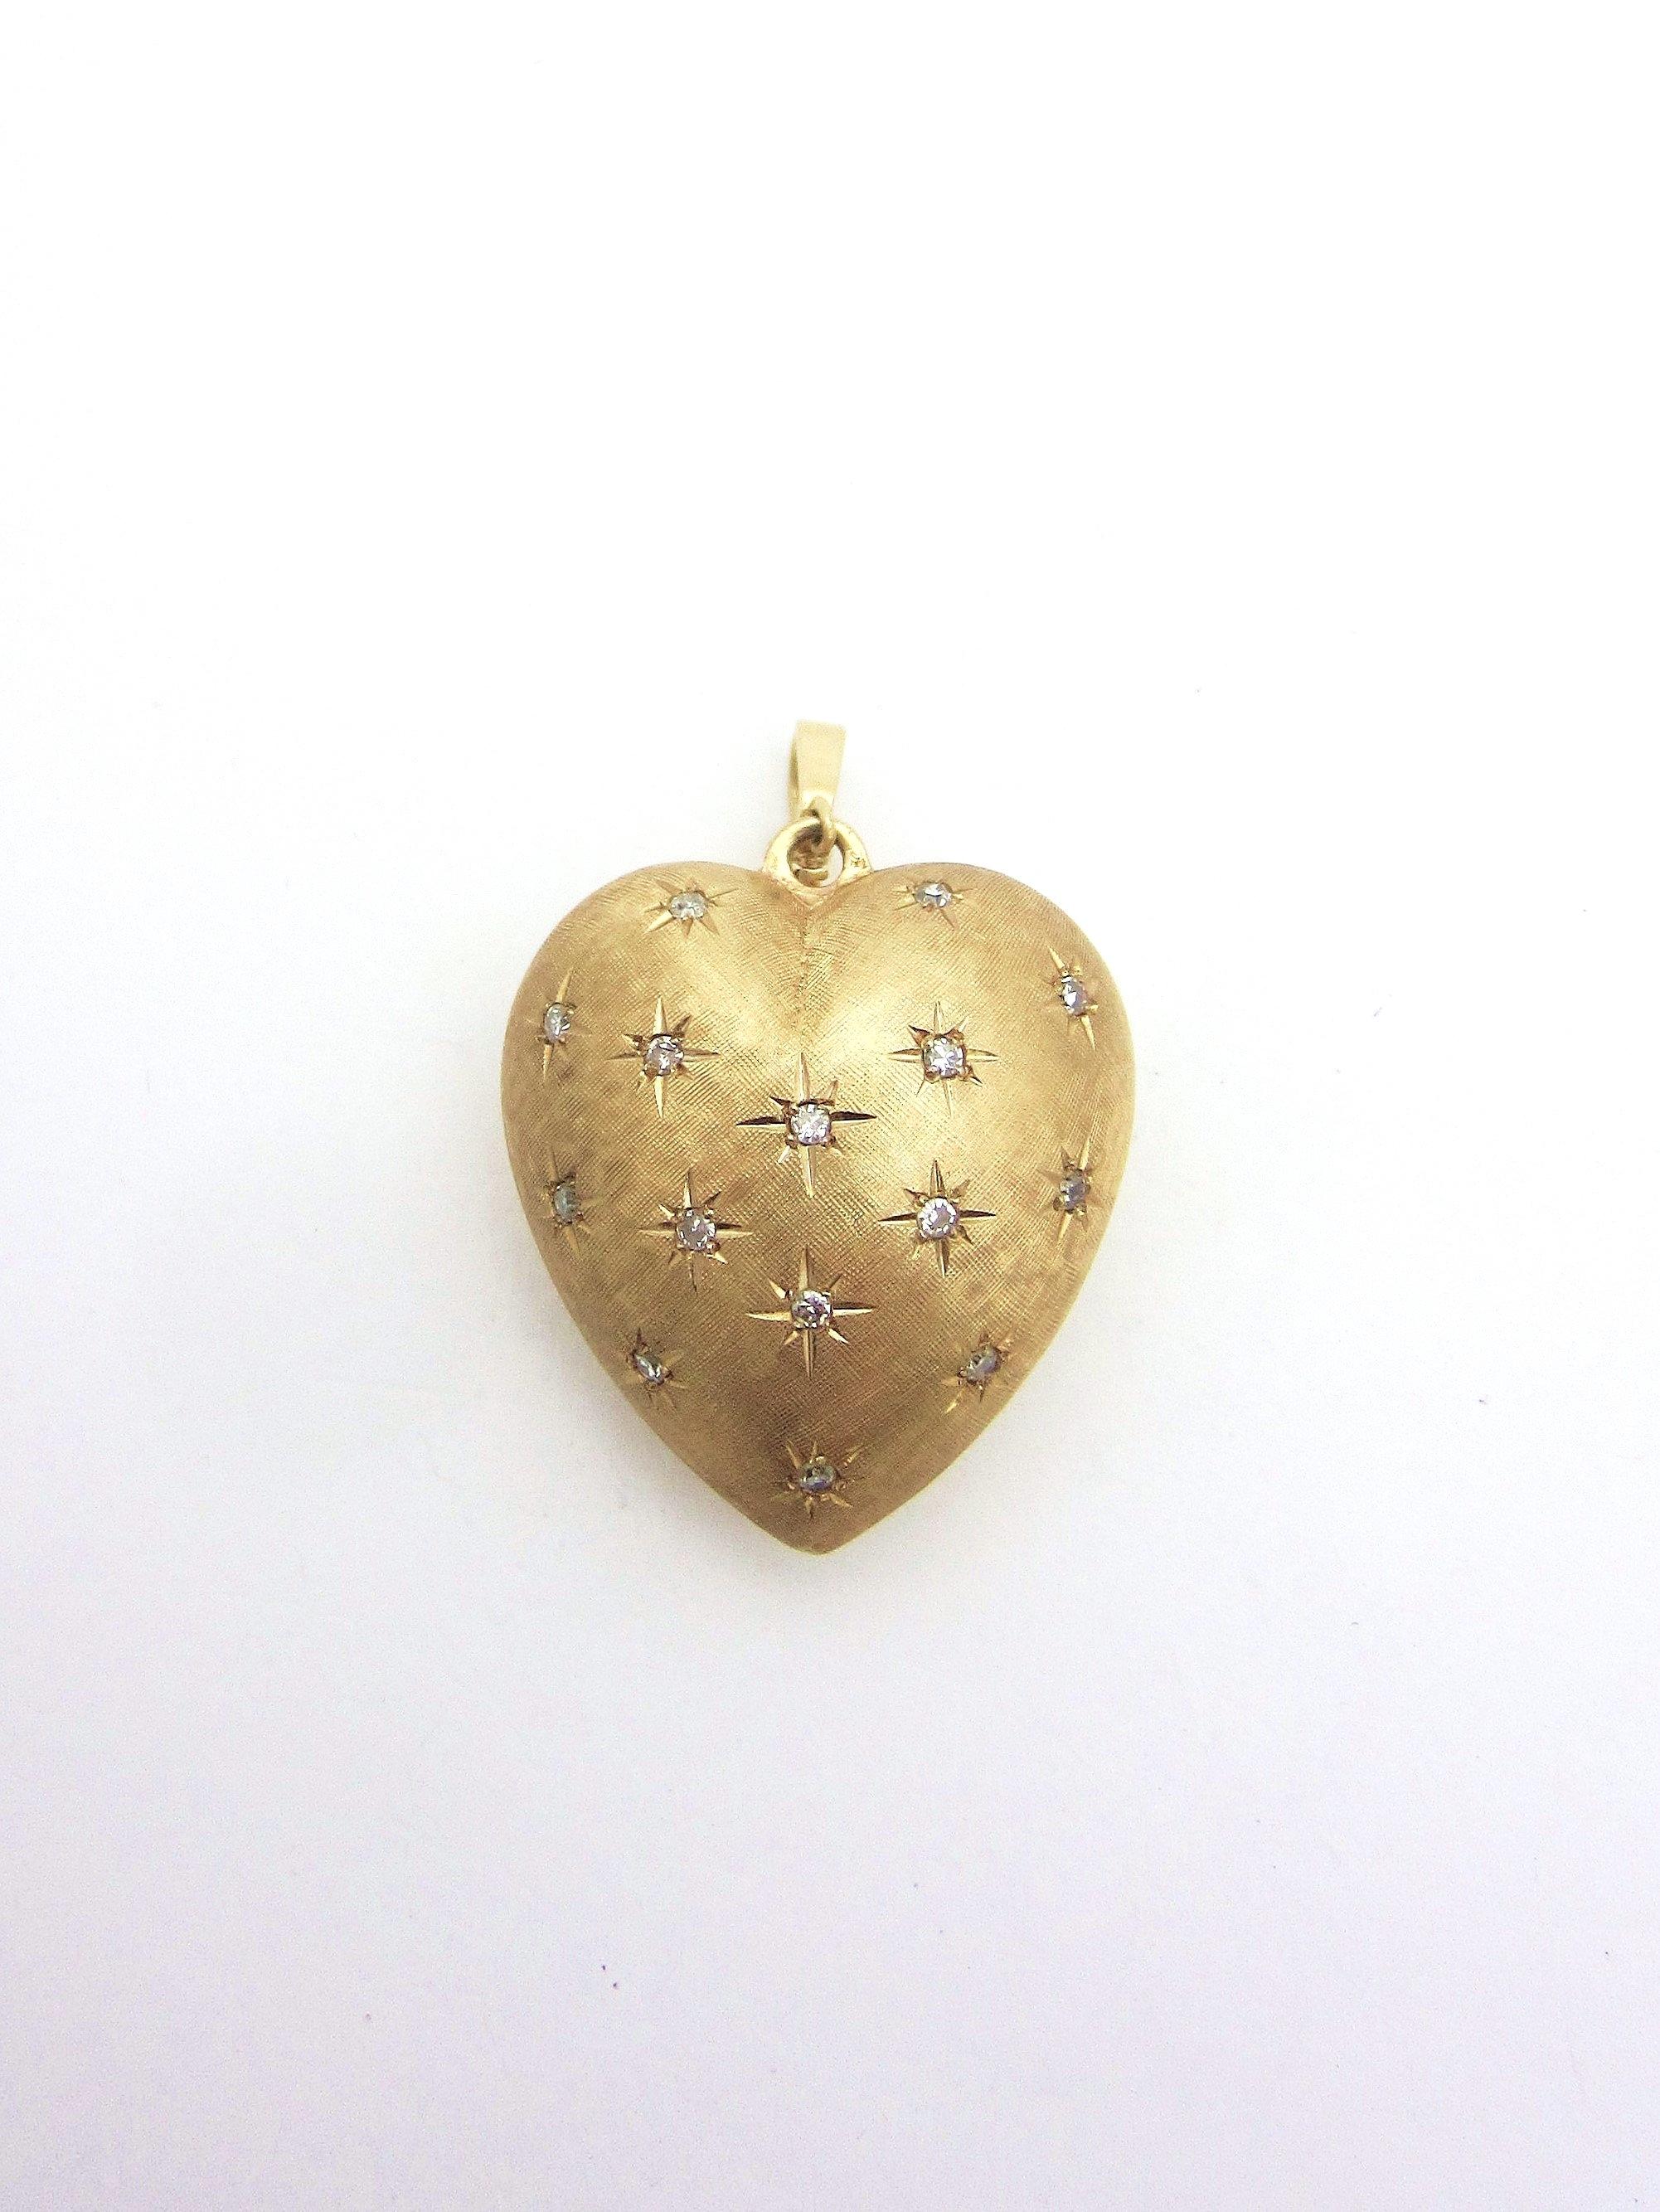 A wonderful large 14k rosy yellow gold pendant enhancer from a vintage estate in the shape of a puffed heart in 3D.  

The front contains fifteen star-set single cut diamonds weighing about .35cttw over a Florentine finished background.  The back is